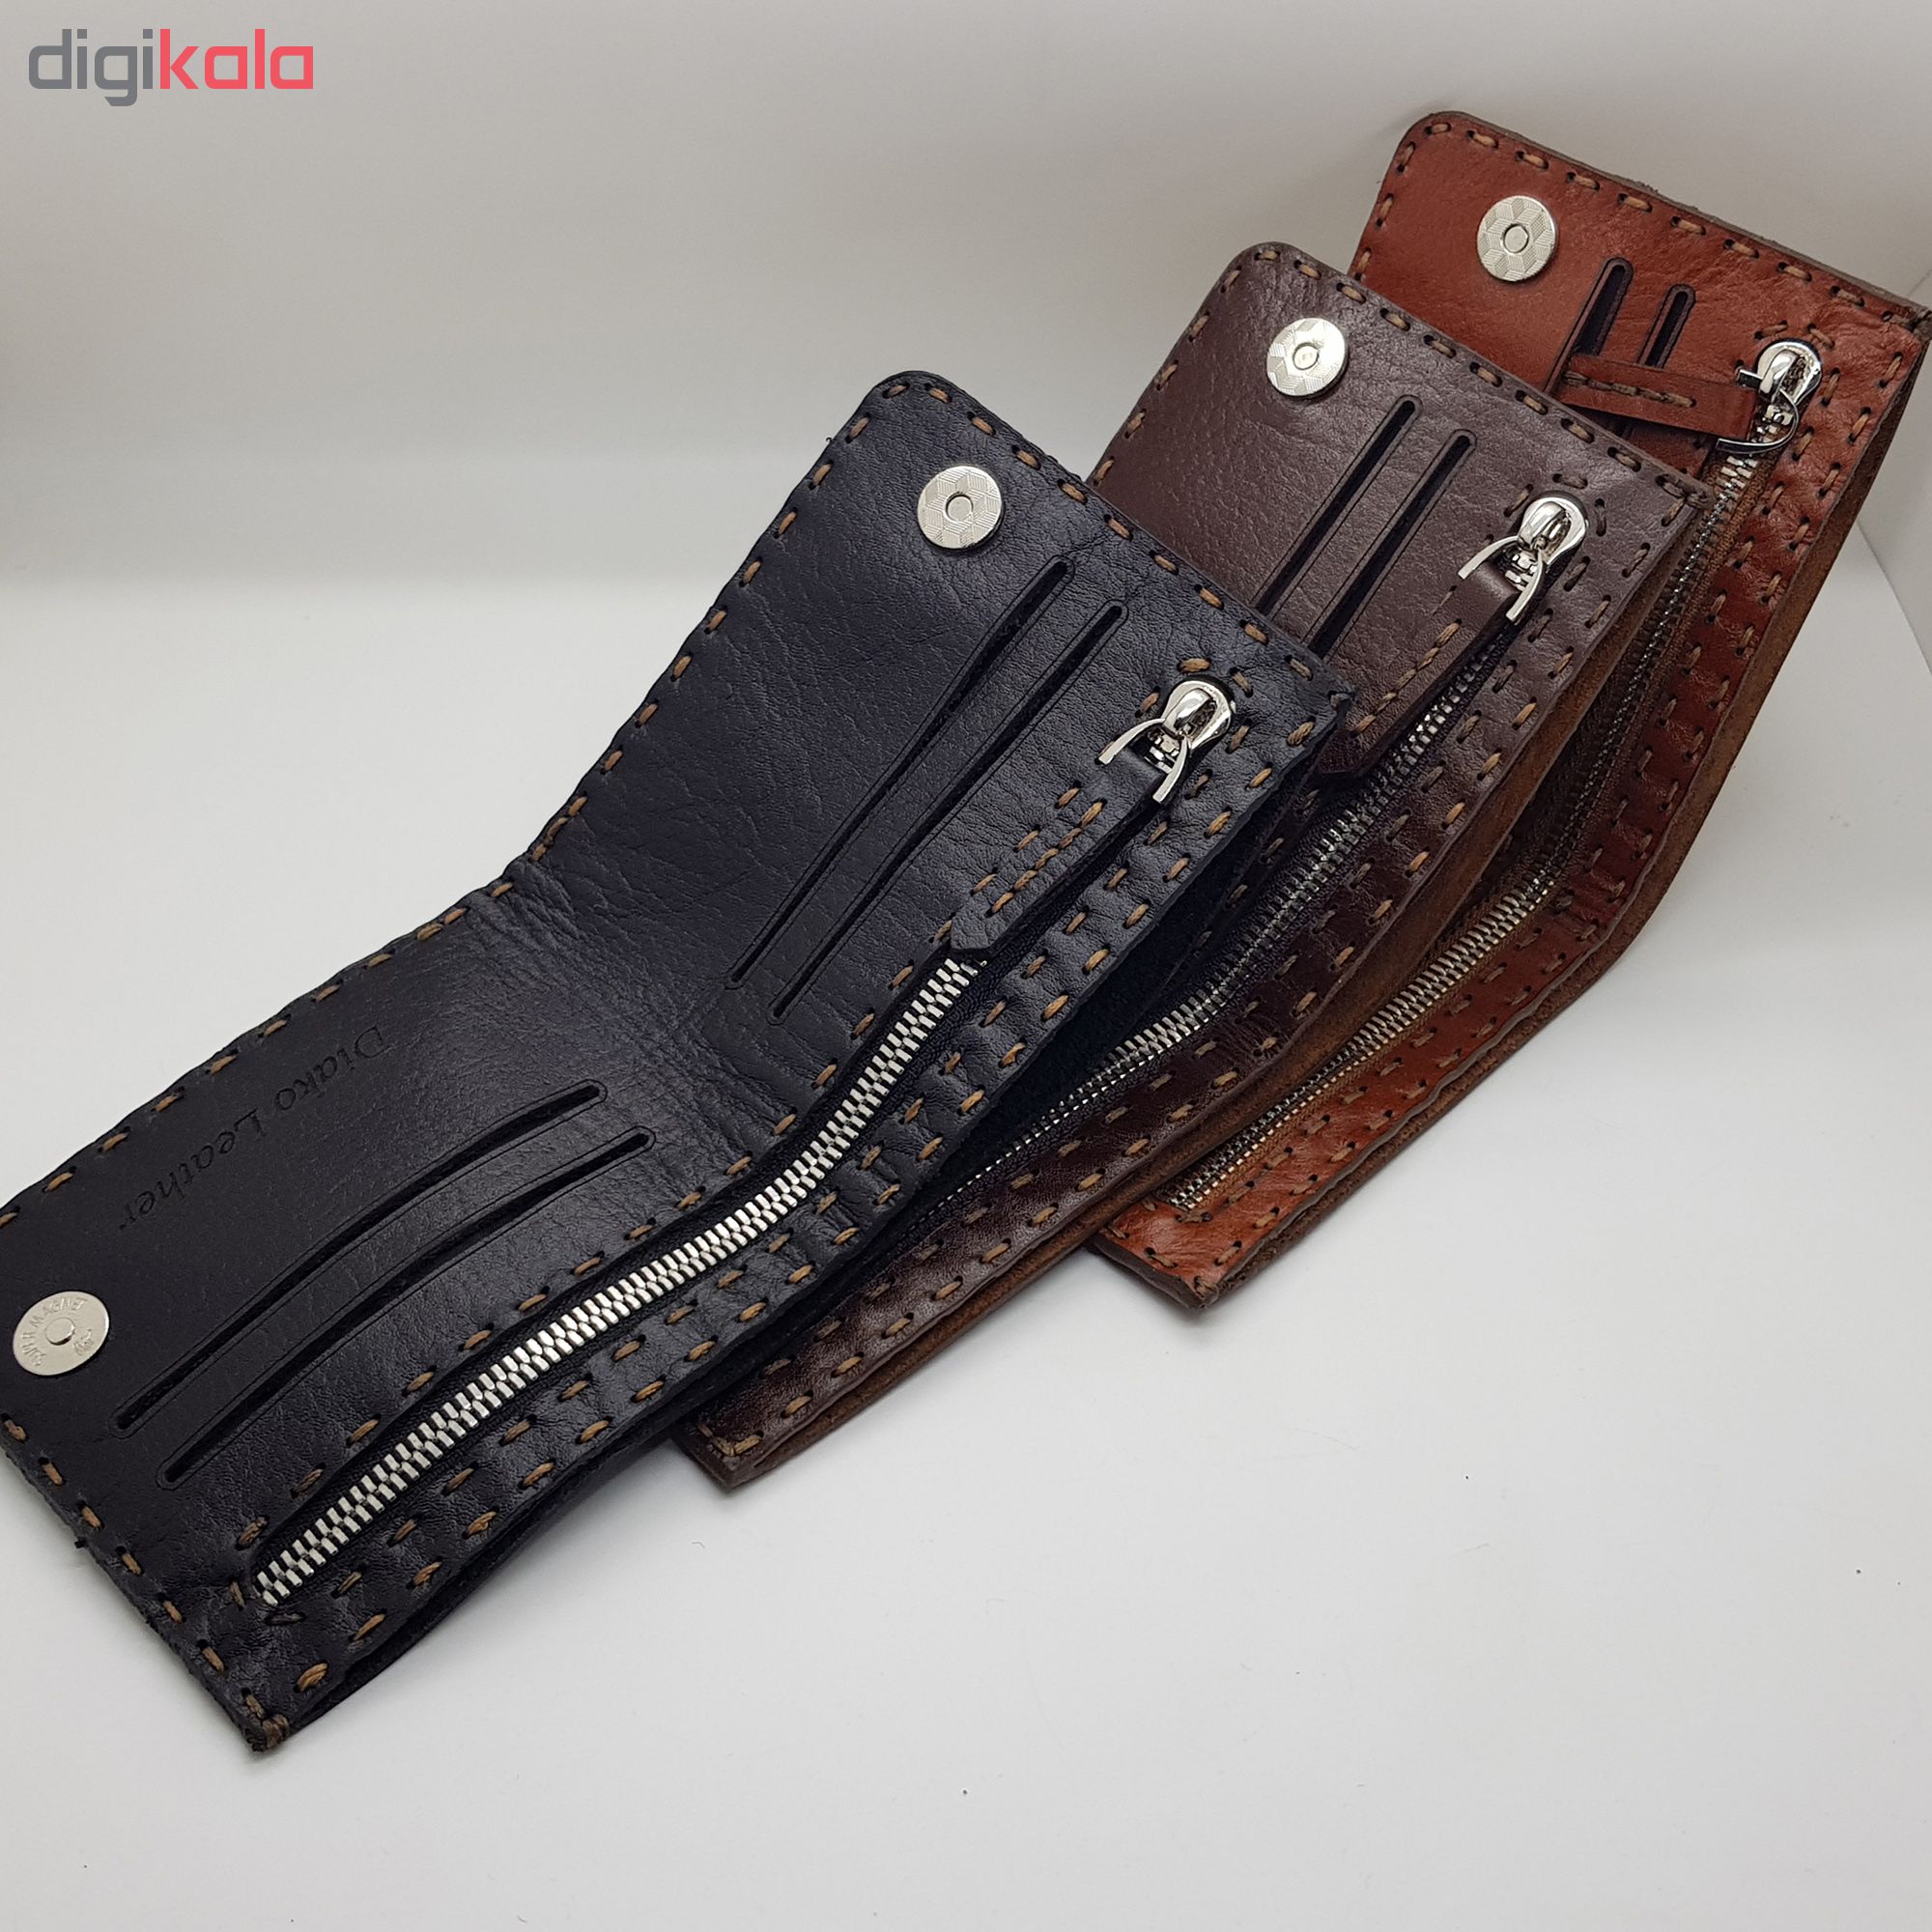 leather wallet, DIYAKO leather, model mpd100